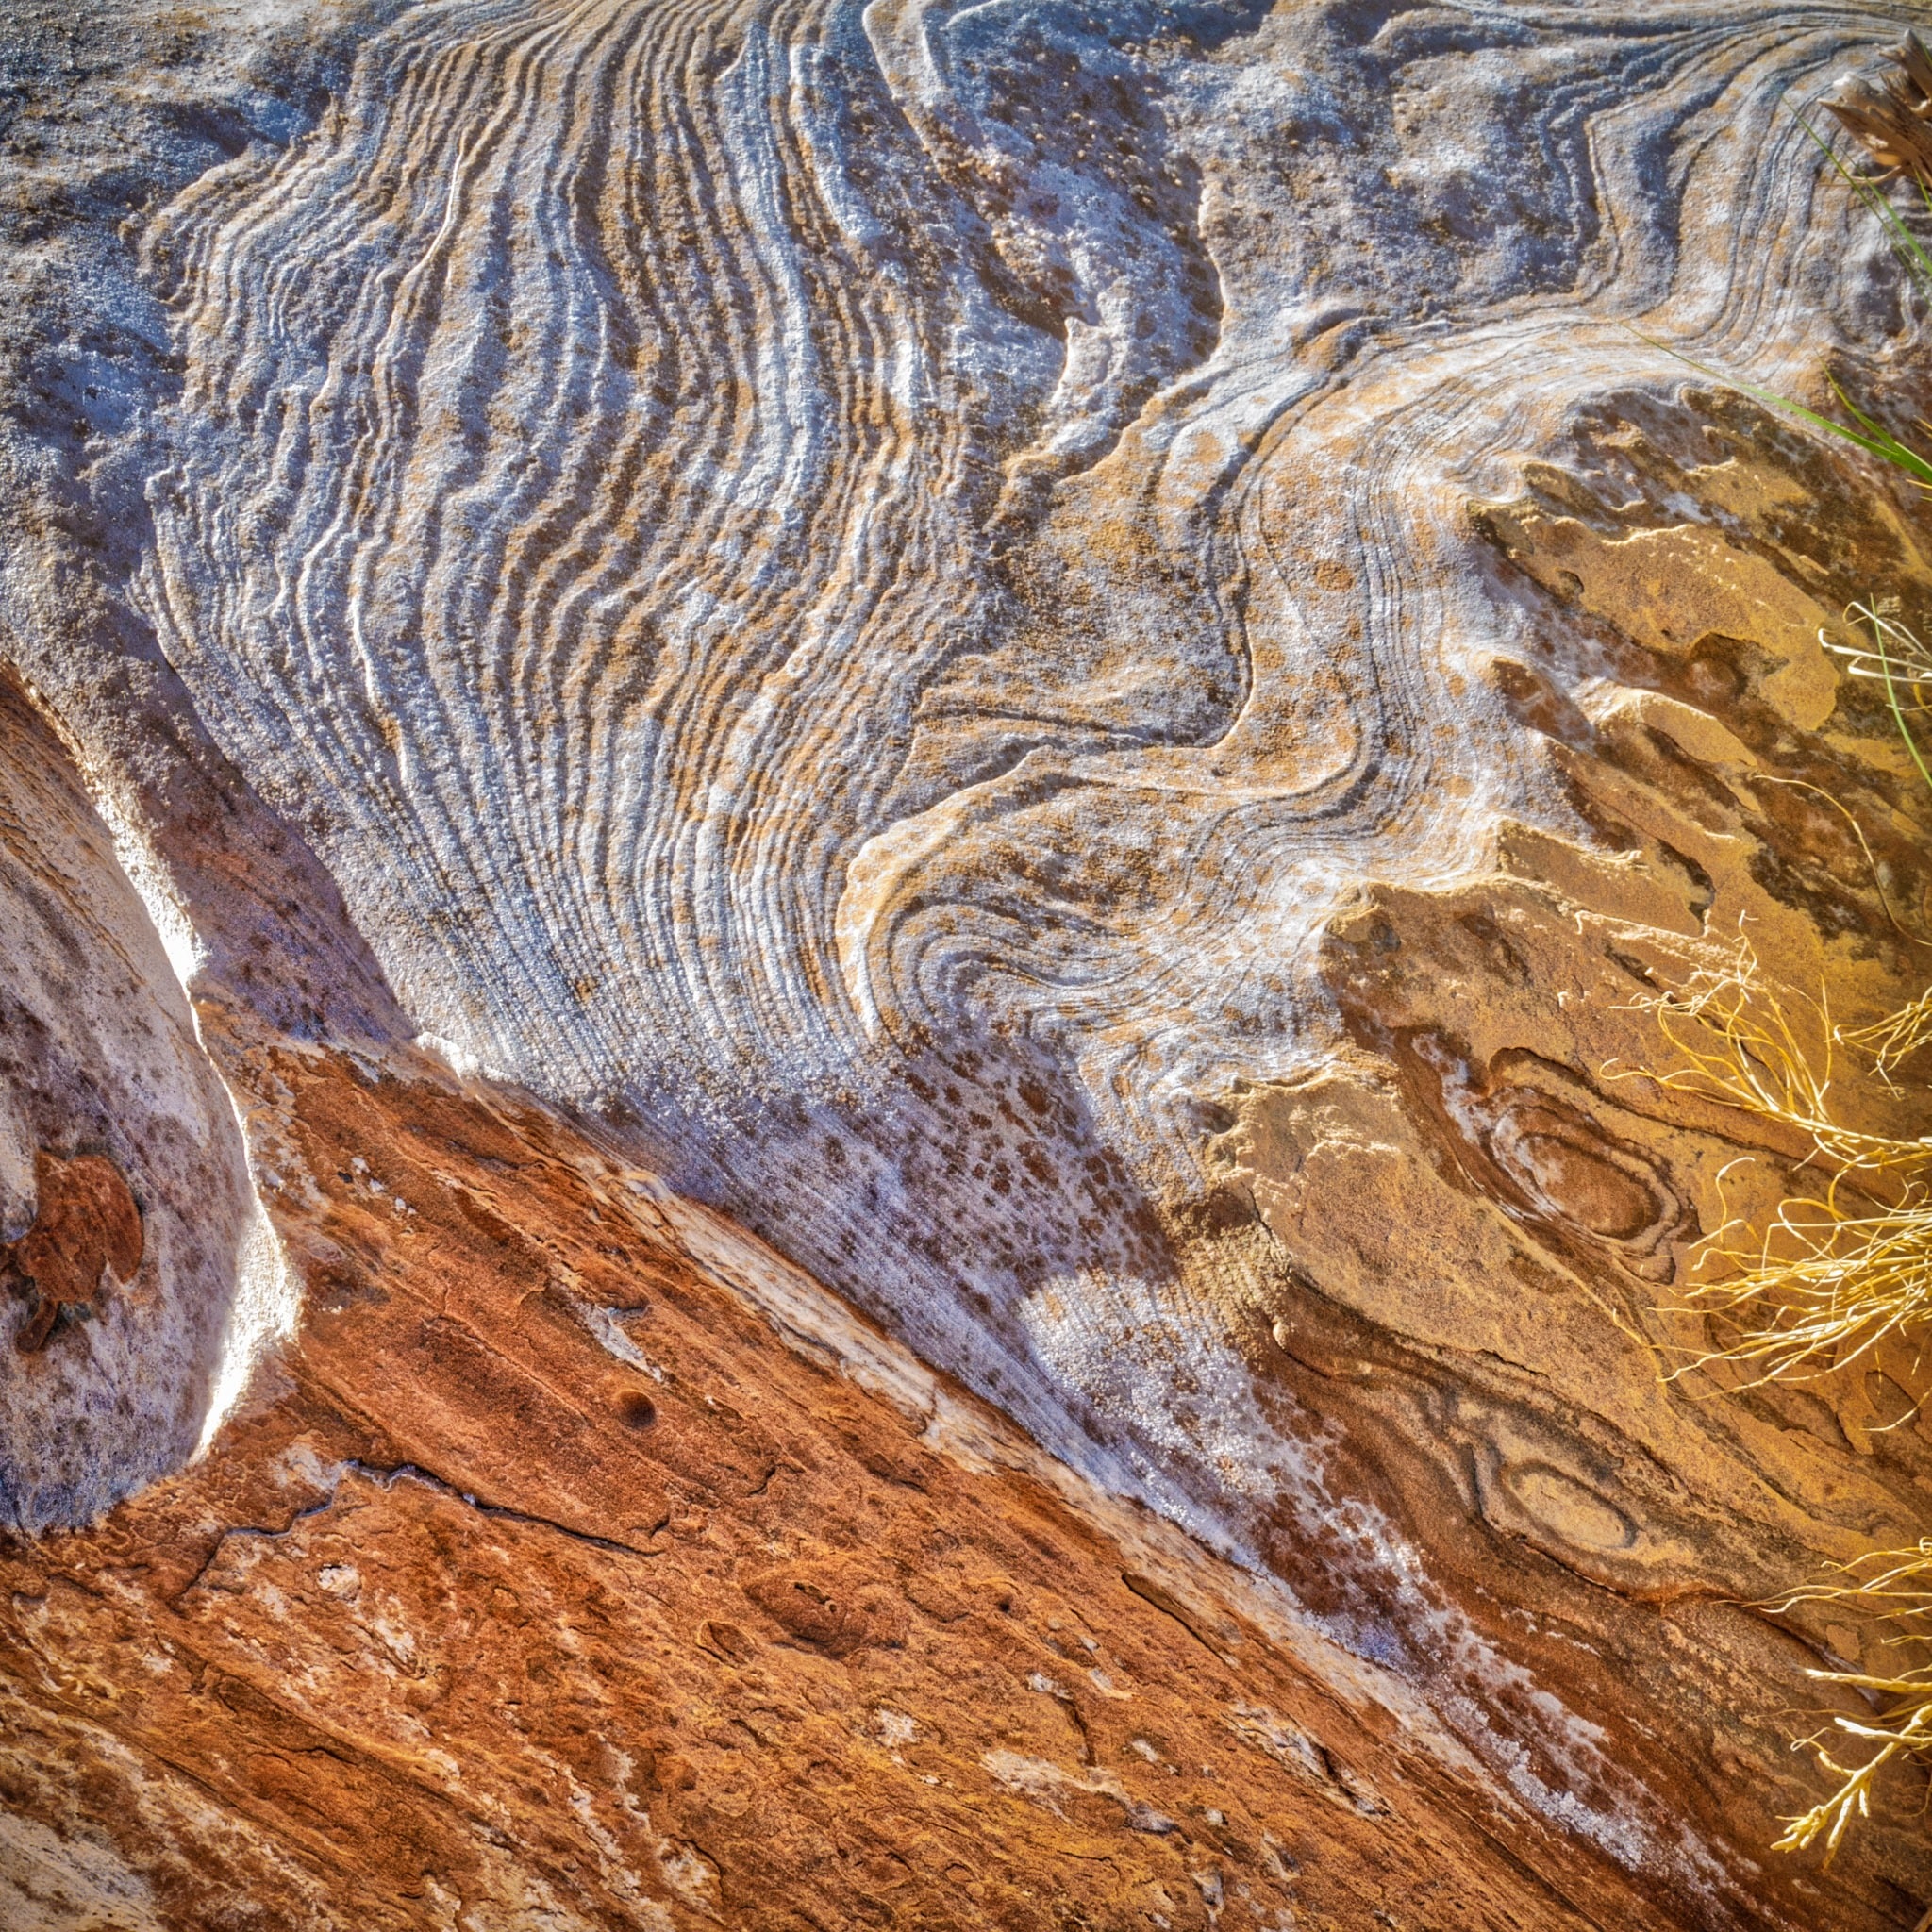 This rock texture along Upper Muley Twist Canyon Road is representative of the beautiful patterns in the sandstone of the Waterpocket Fold, in Capitol Reef National Park, Utah.